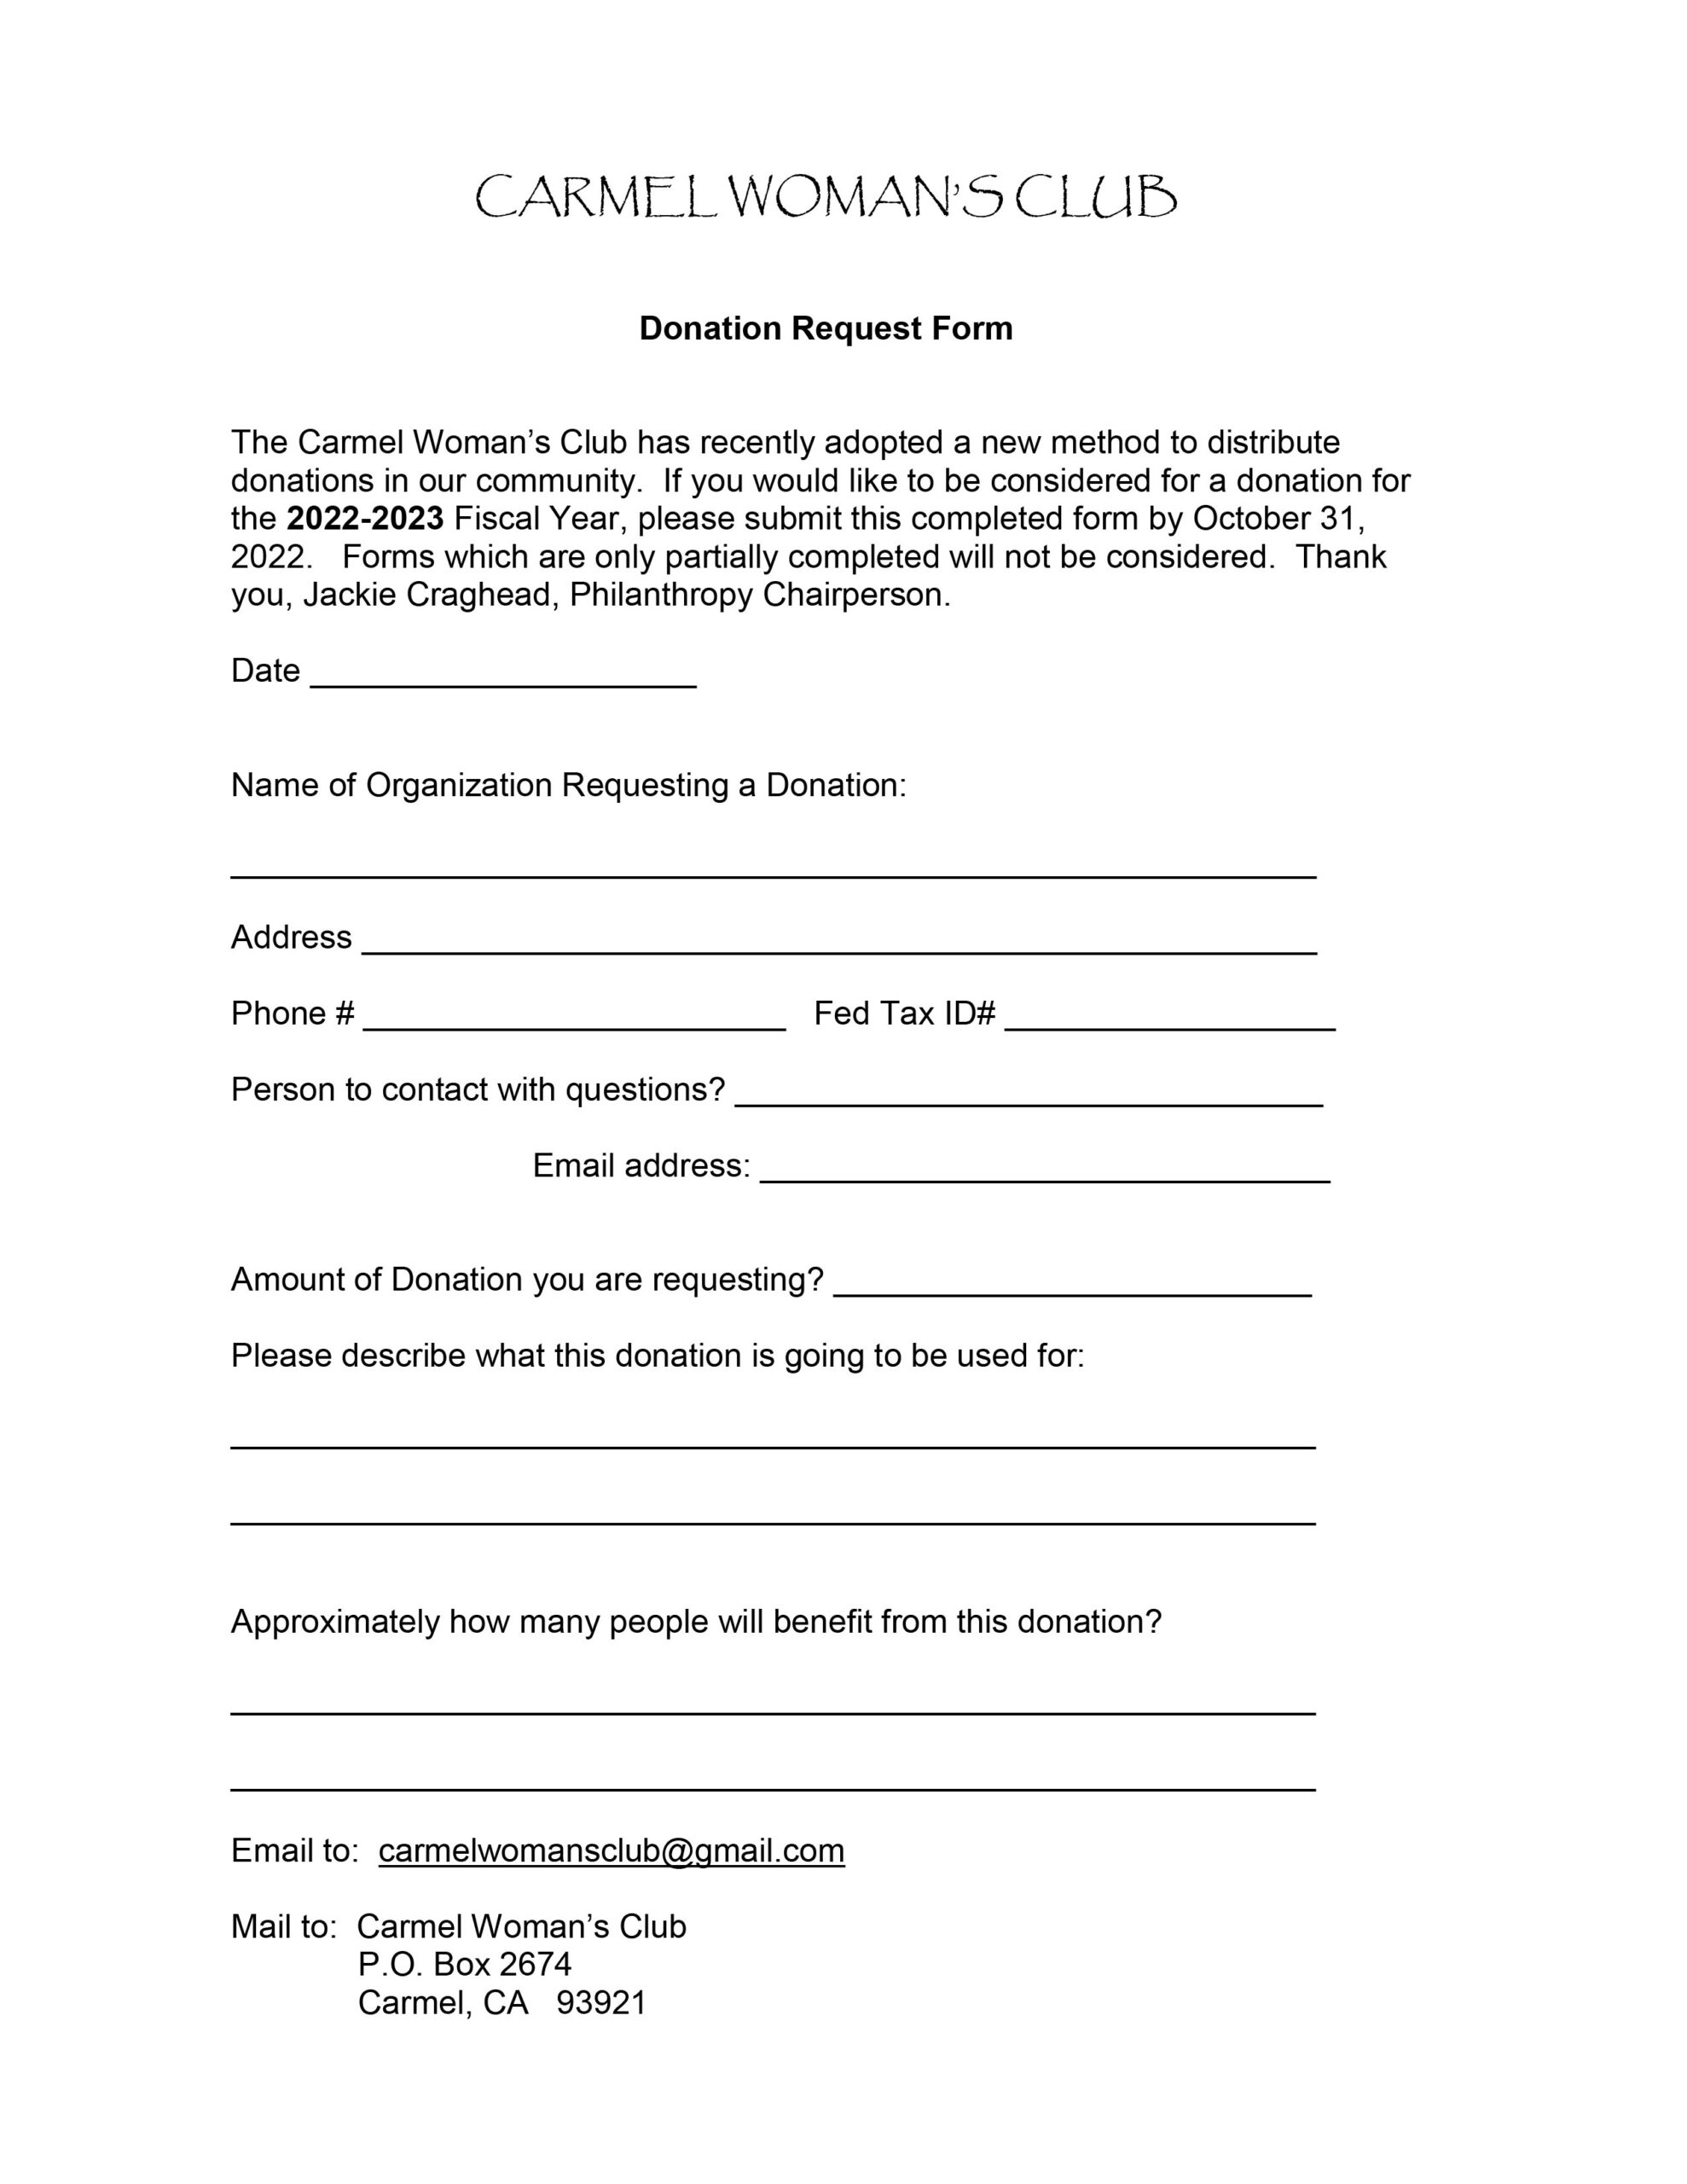 2022 Grant Request Form